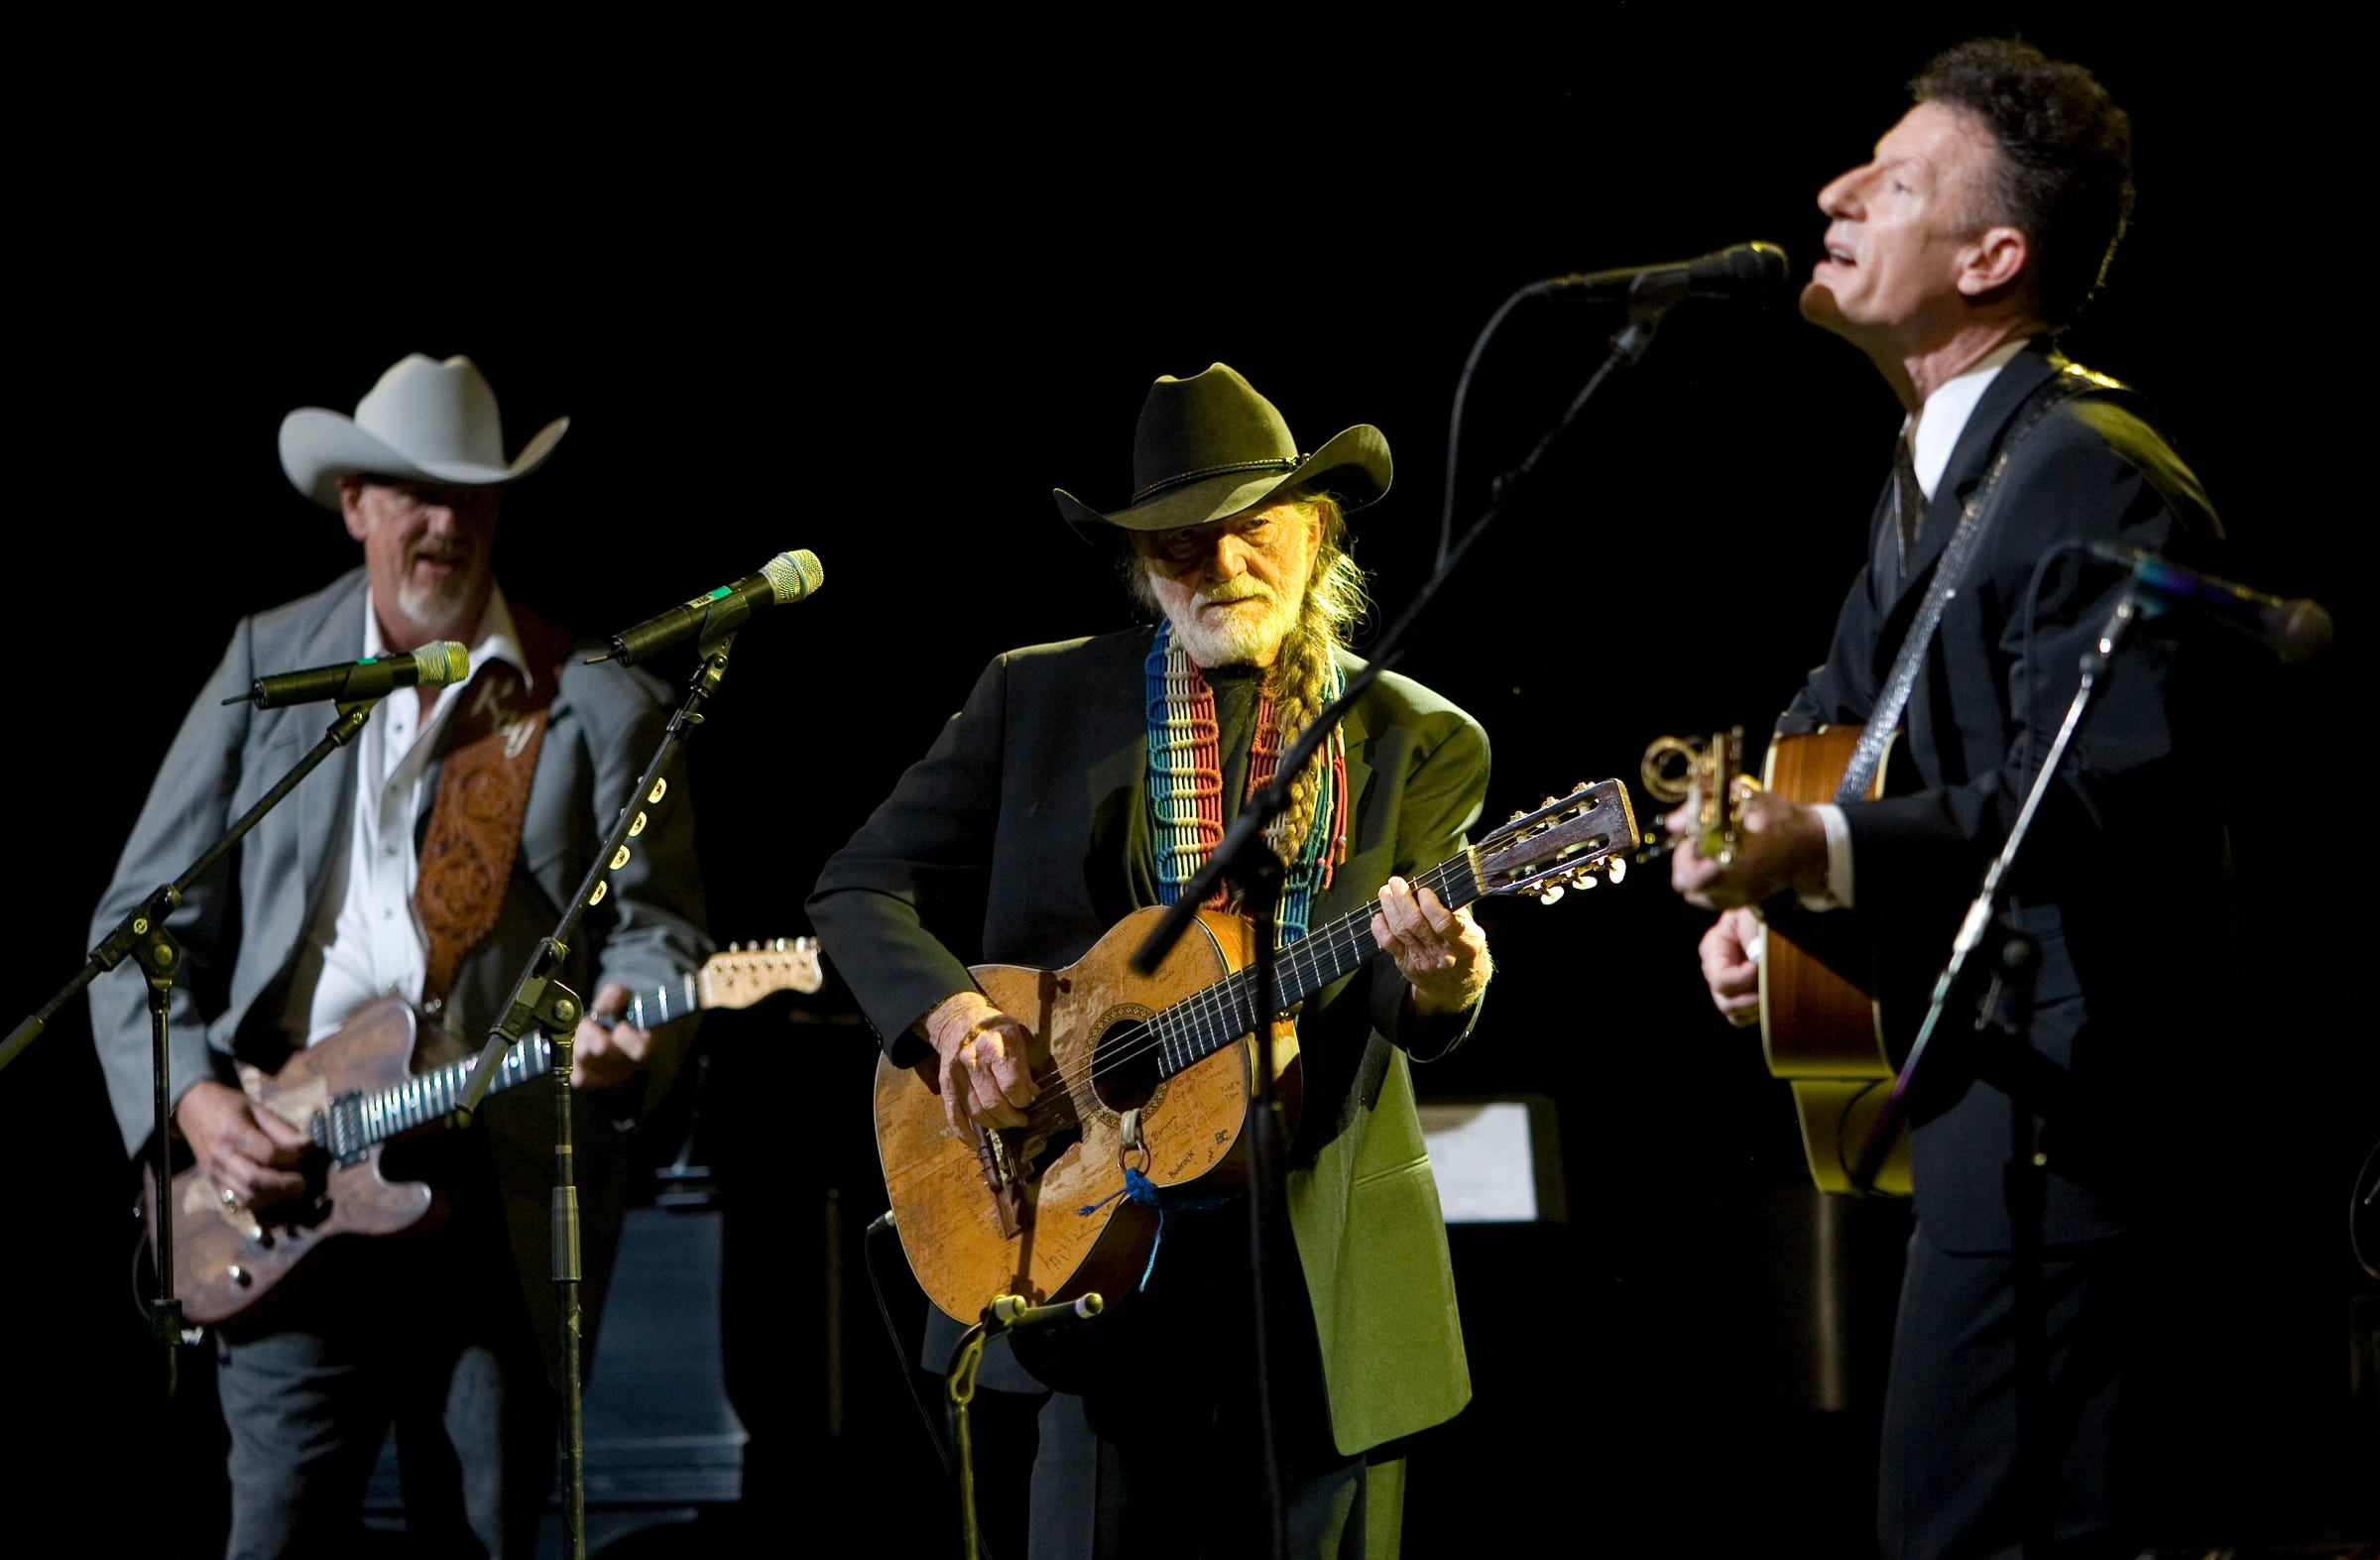 Left to right, Ray Benson, Willie Nelson and Lyle Lovett perform at the Grand Opening of the Long Center on Saturday March 29, 2008.